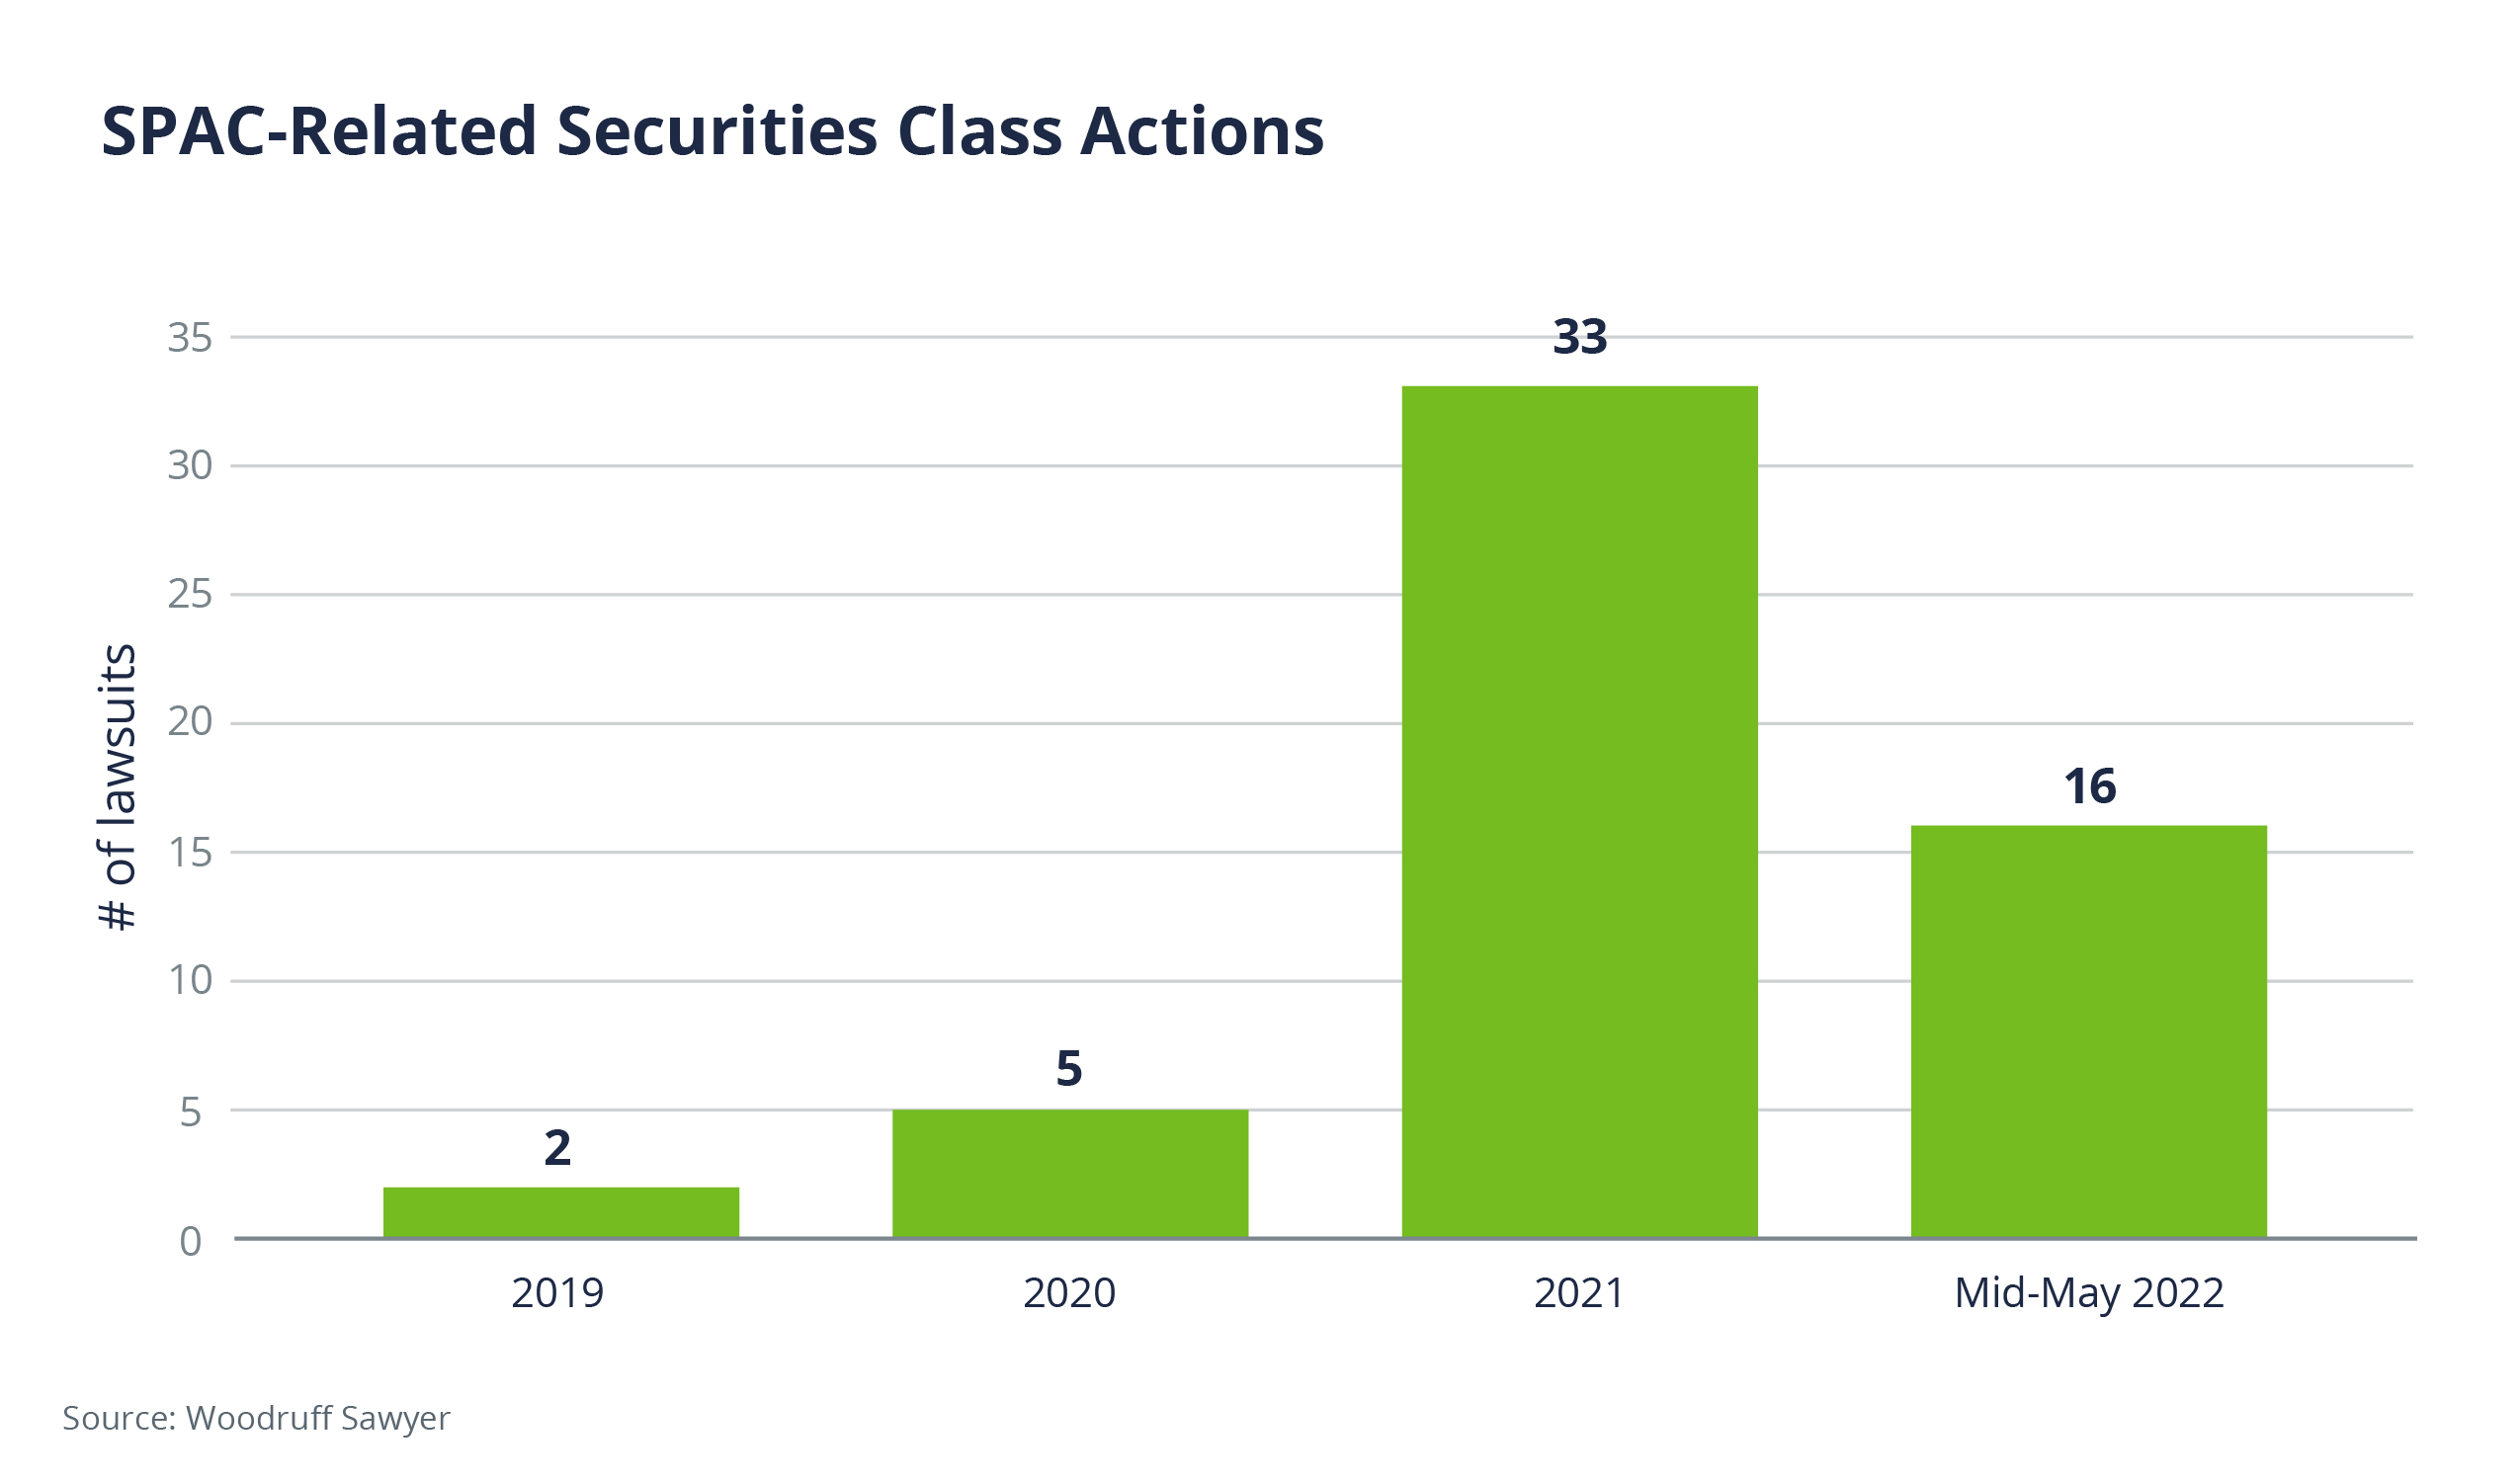 A graph shows there were 2 SPAC-related securities class actions in 2019, 5 in 2020, 33 in 2021, and 16 by mid-May 2022.